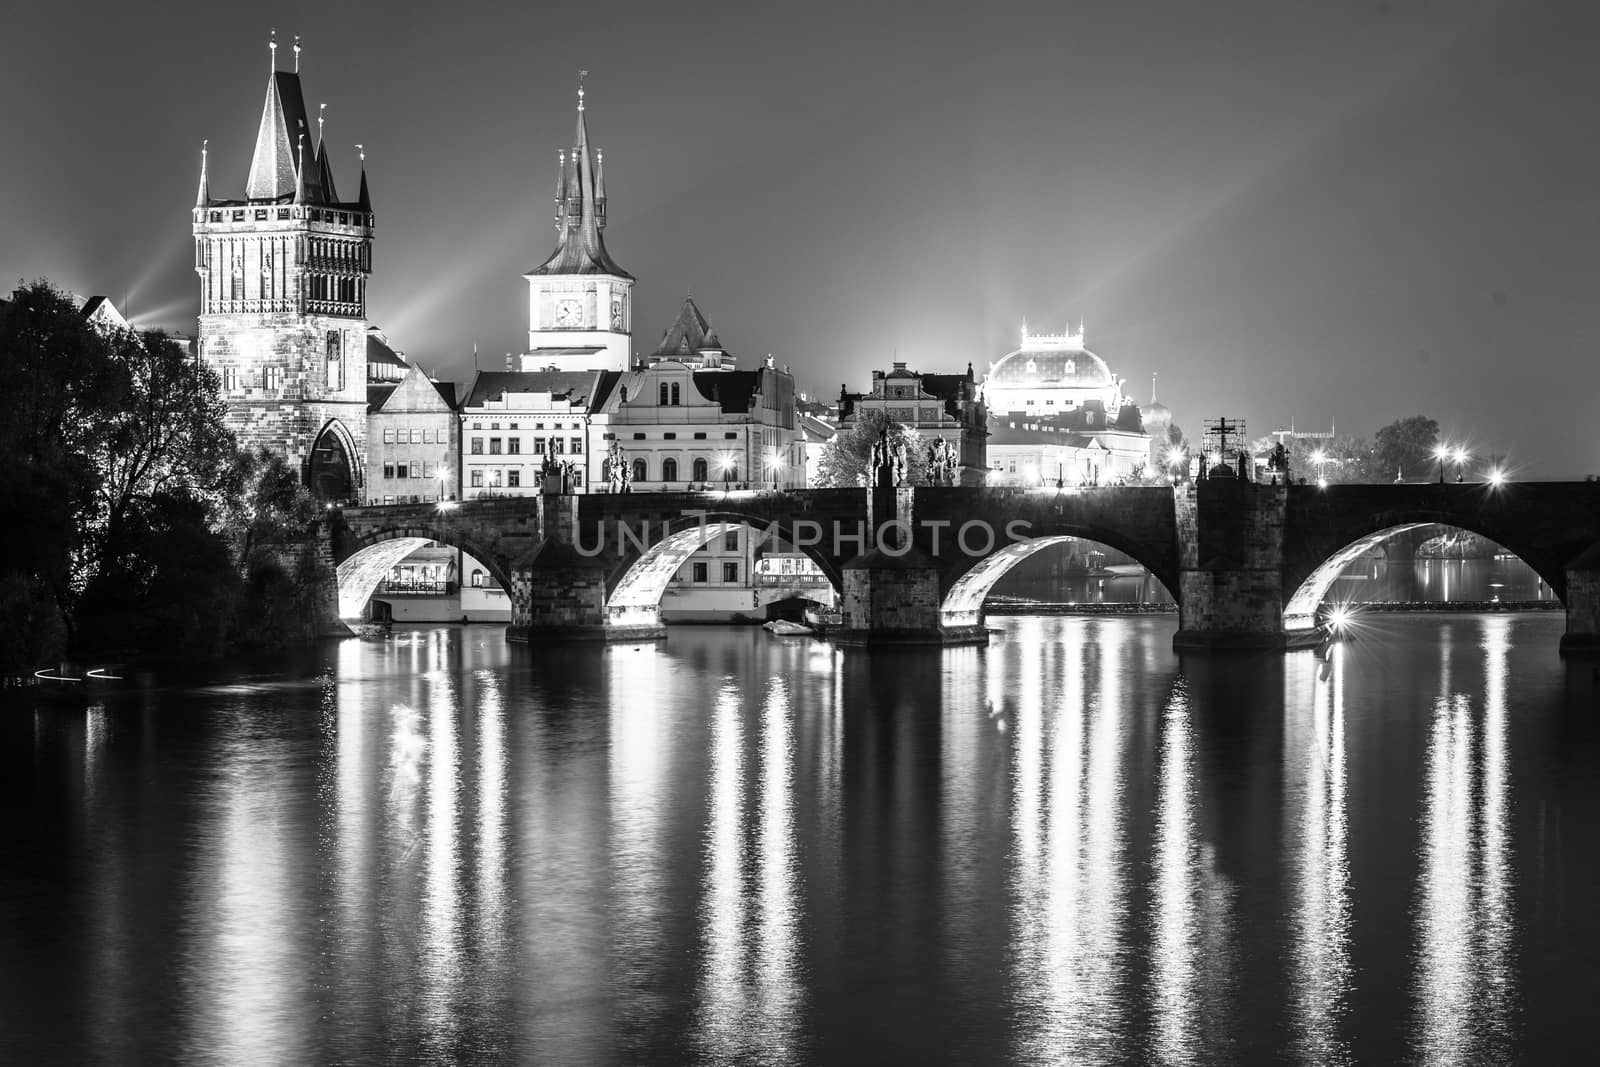 Vltava River and Charles Bridge with Old Town Bridge Tower by night, Prague, Czechia. UNESCO World Heritage Site. Black and white image.